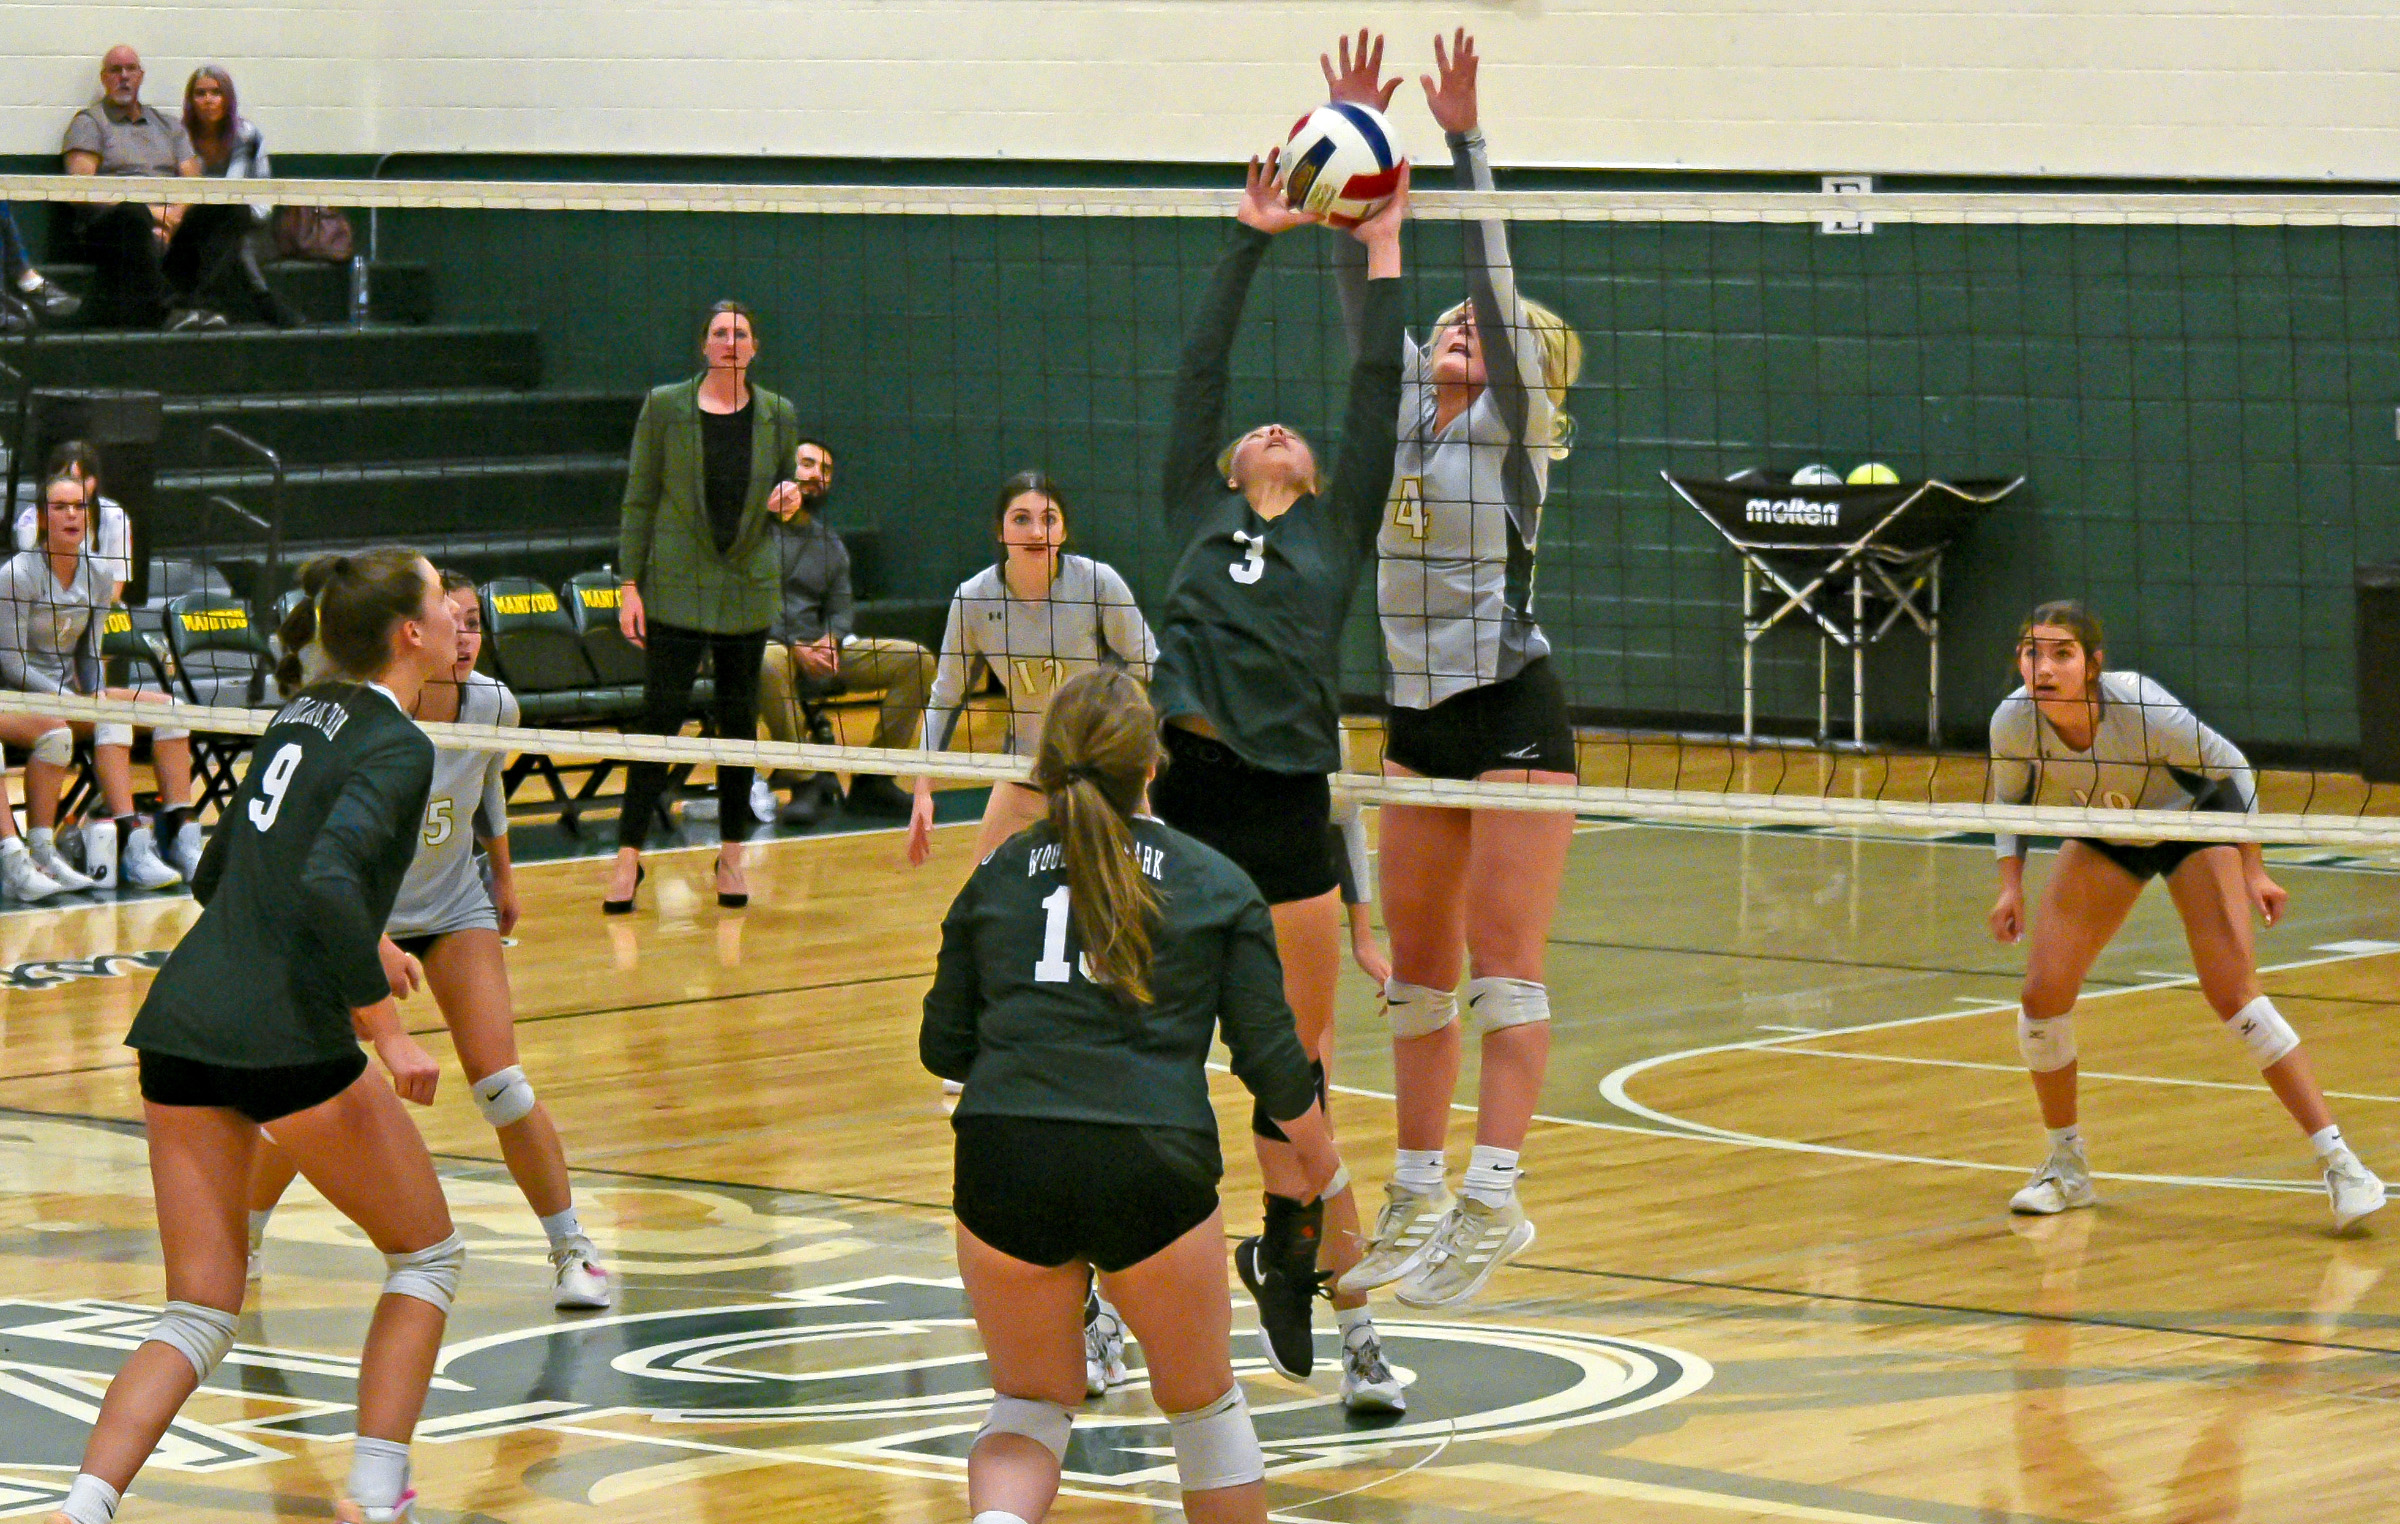 Ayla Flett goes for the block during the Mustangs’ match against Woodland Park on Oct. 13. Teammates (also in light shirts) Lily Glass, Cassidy Blechman and Grace Allen watch to see what happens. Photo by Bryan Oller